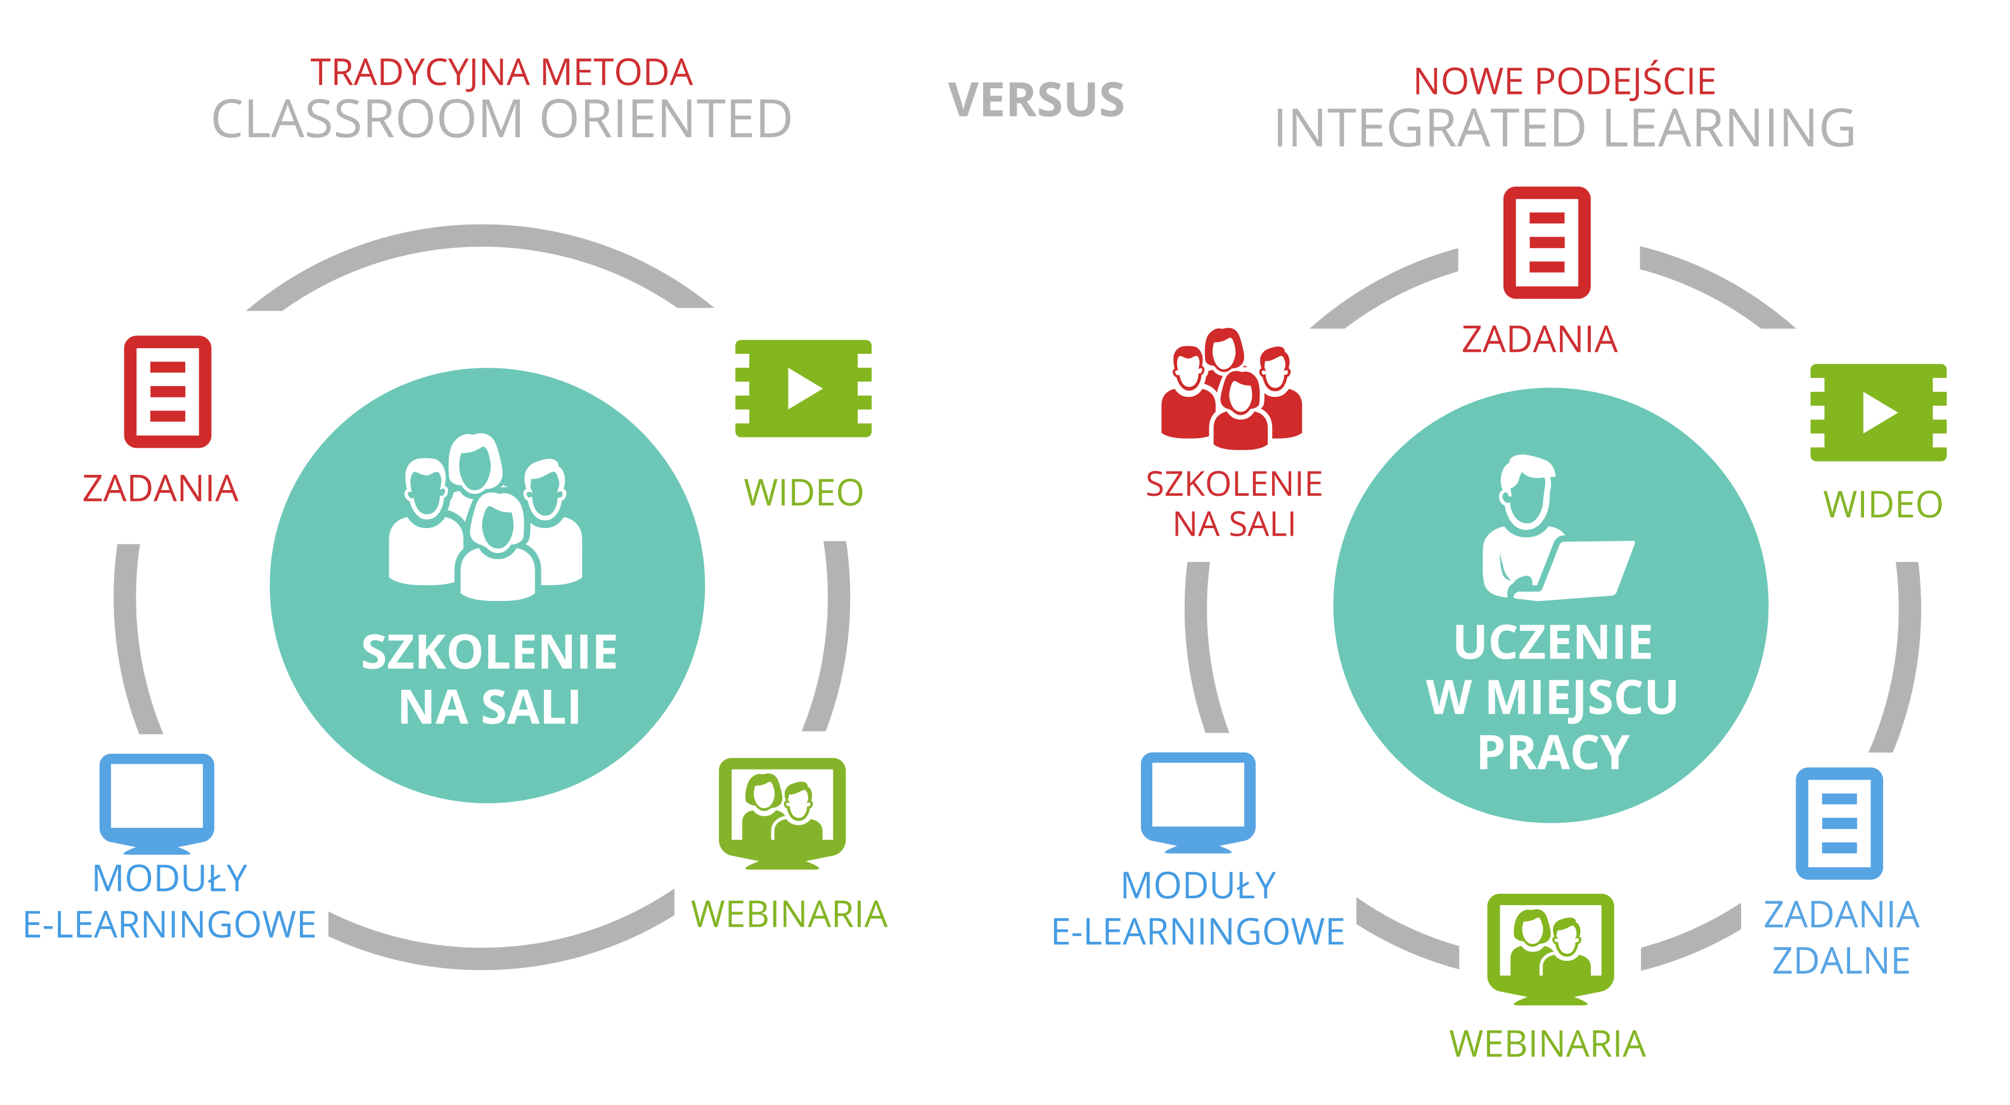 Clasroom vs Integrated Learning